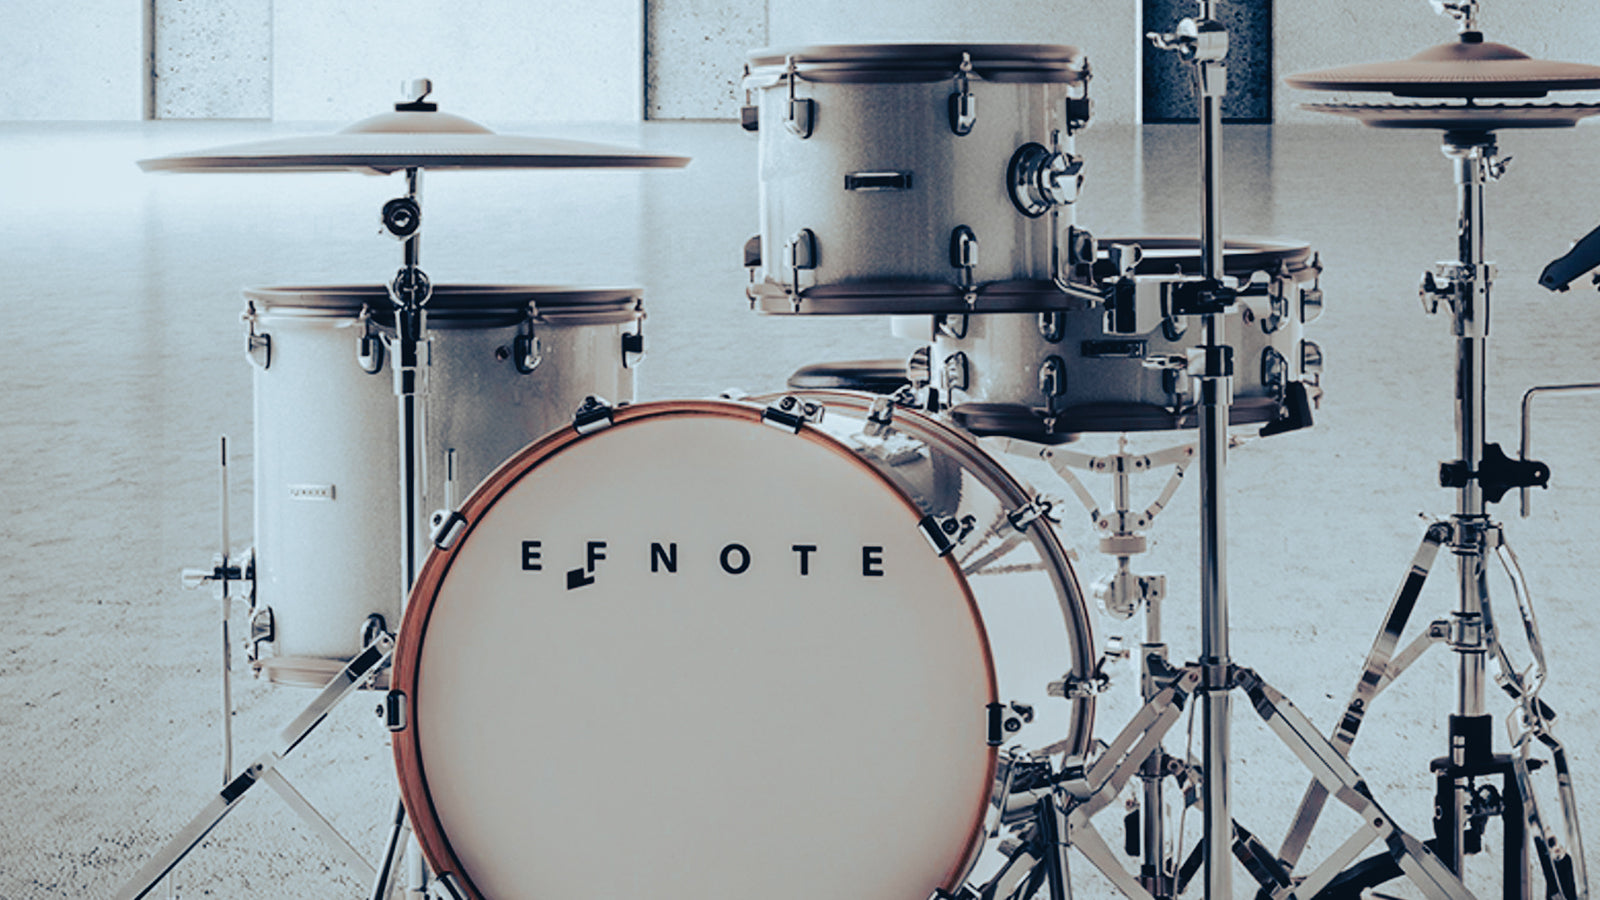 An Efnote 7 in a rehearsal space